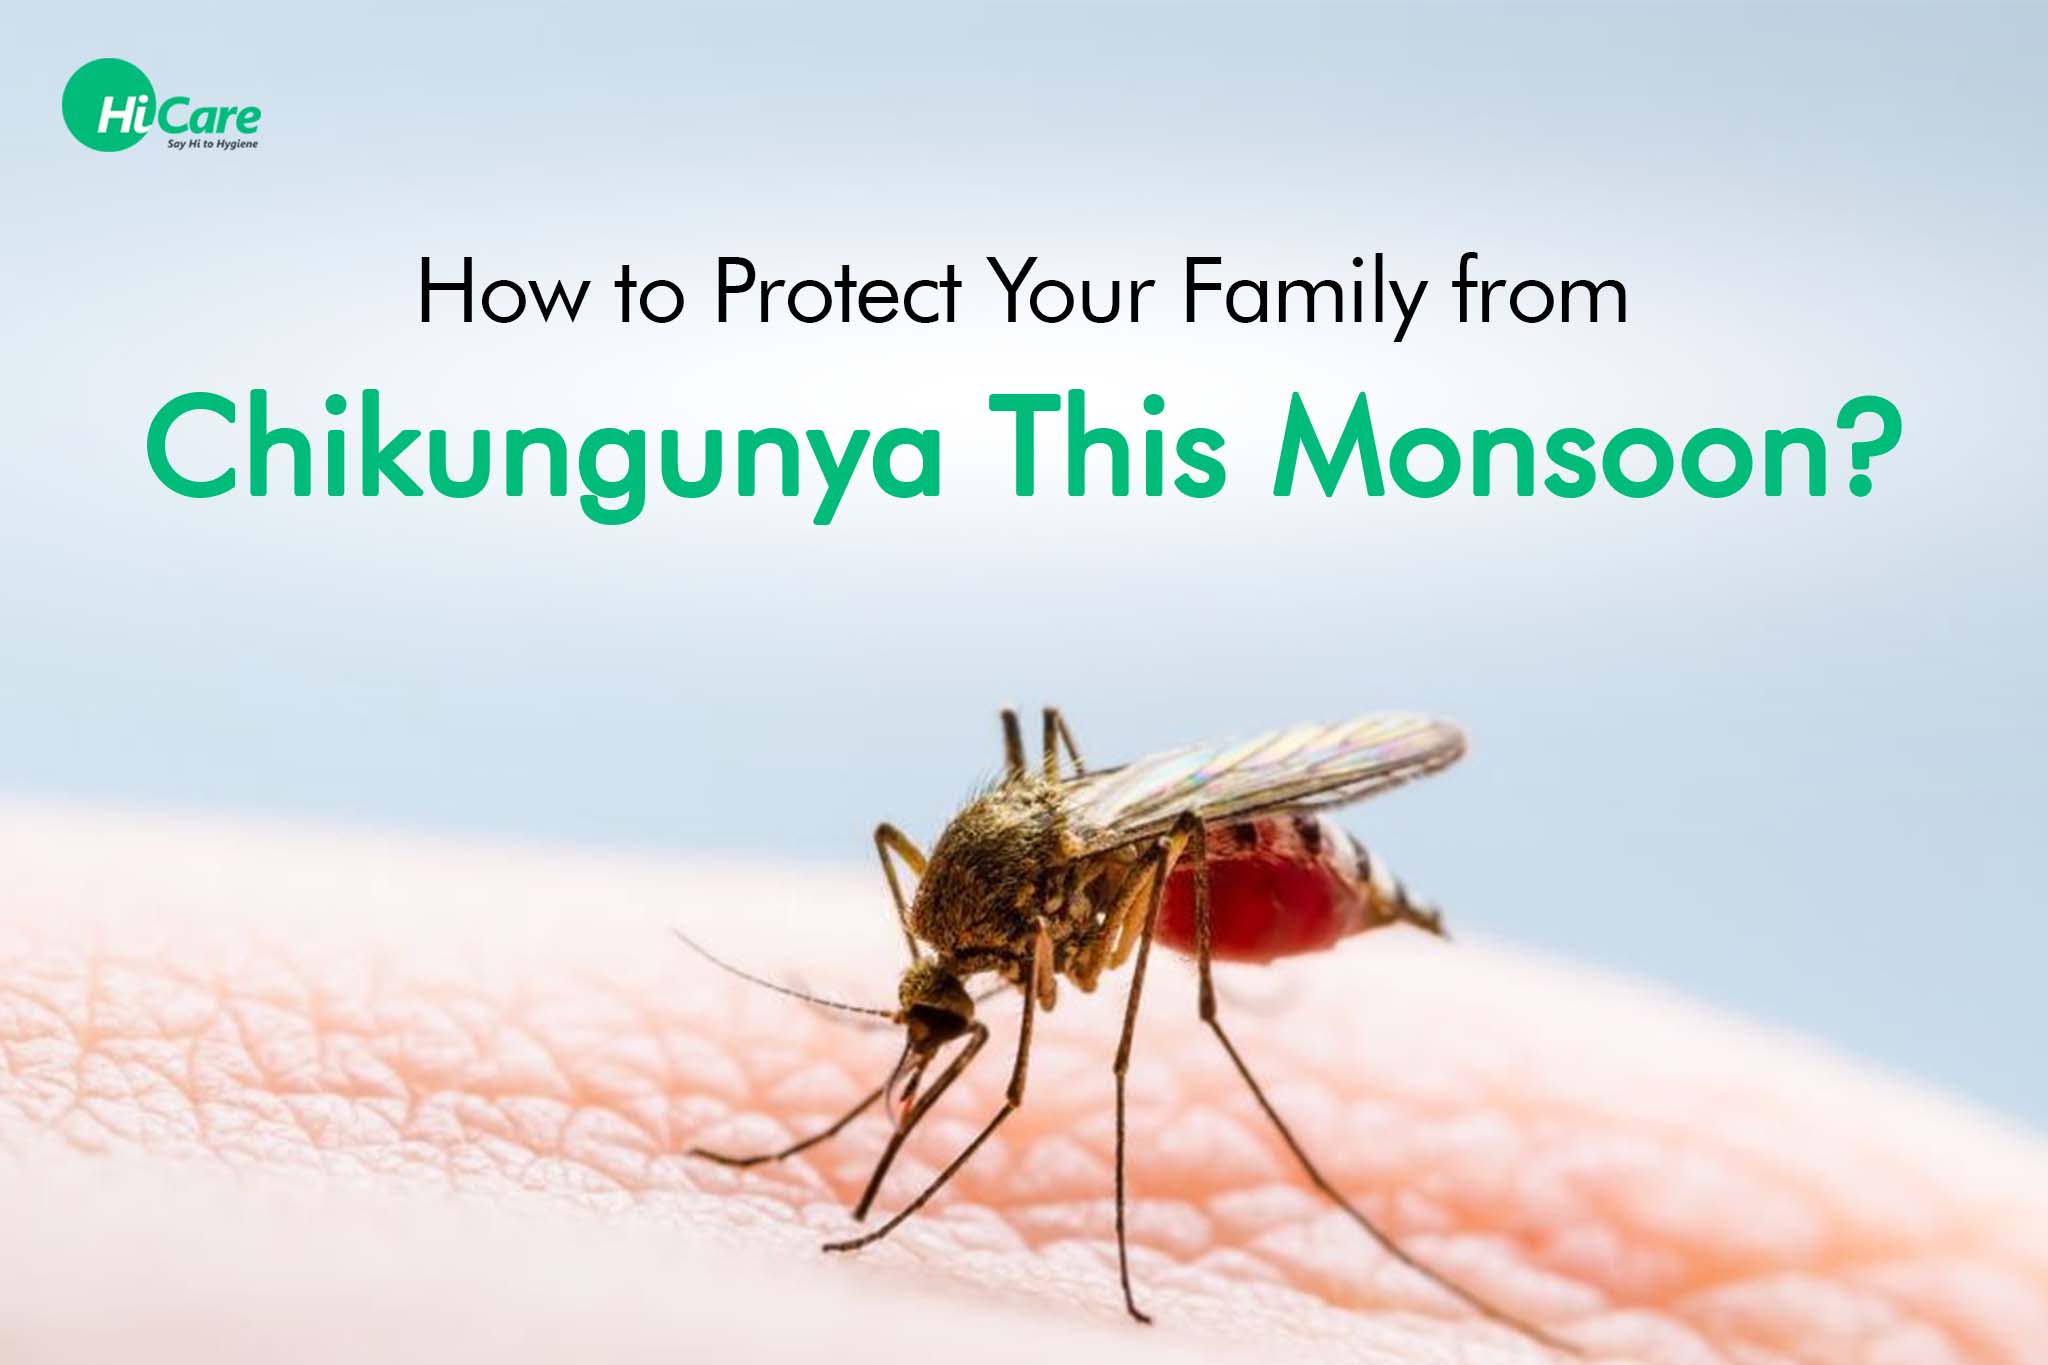 How to Protect Your Family from Chikungunya This Monsoon?